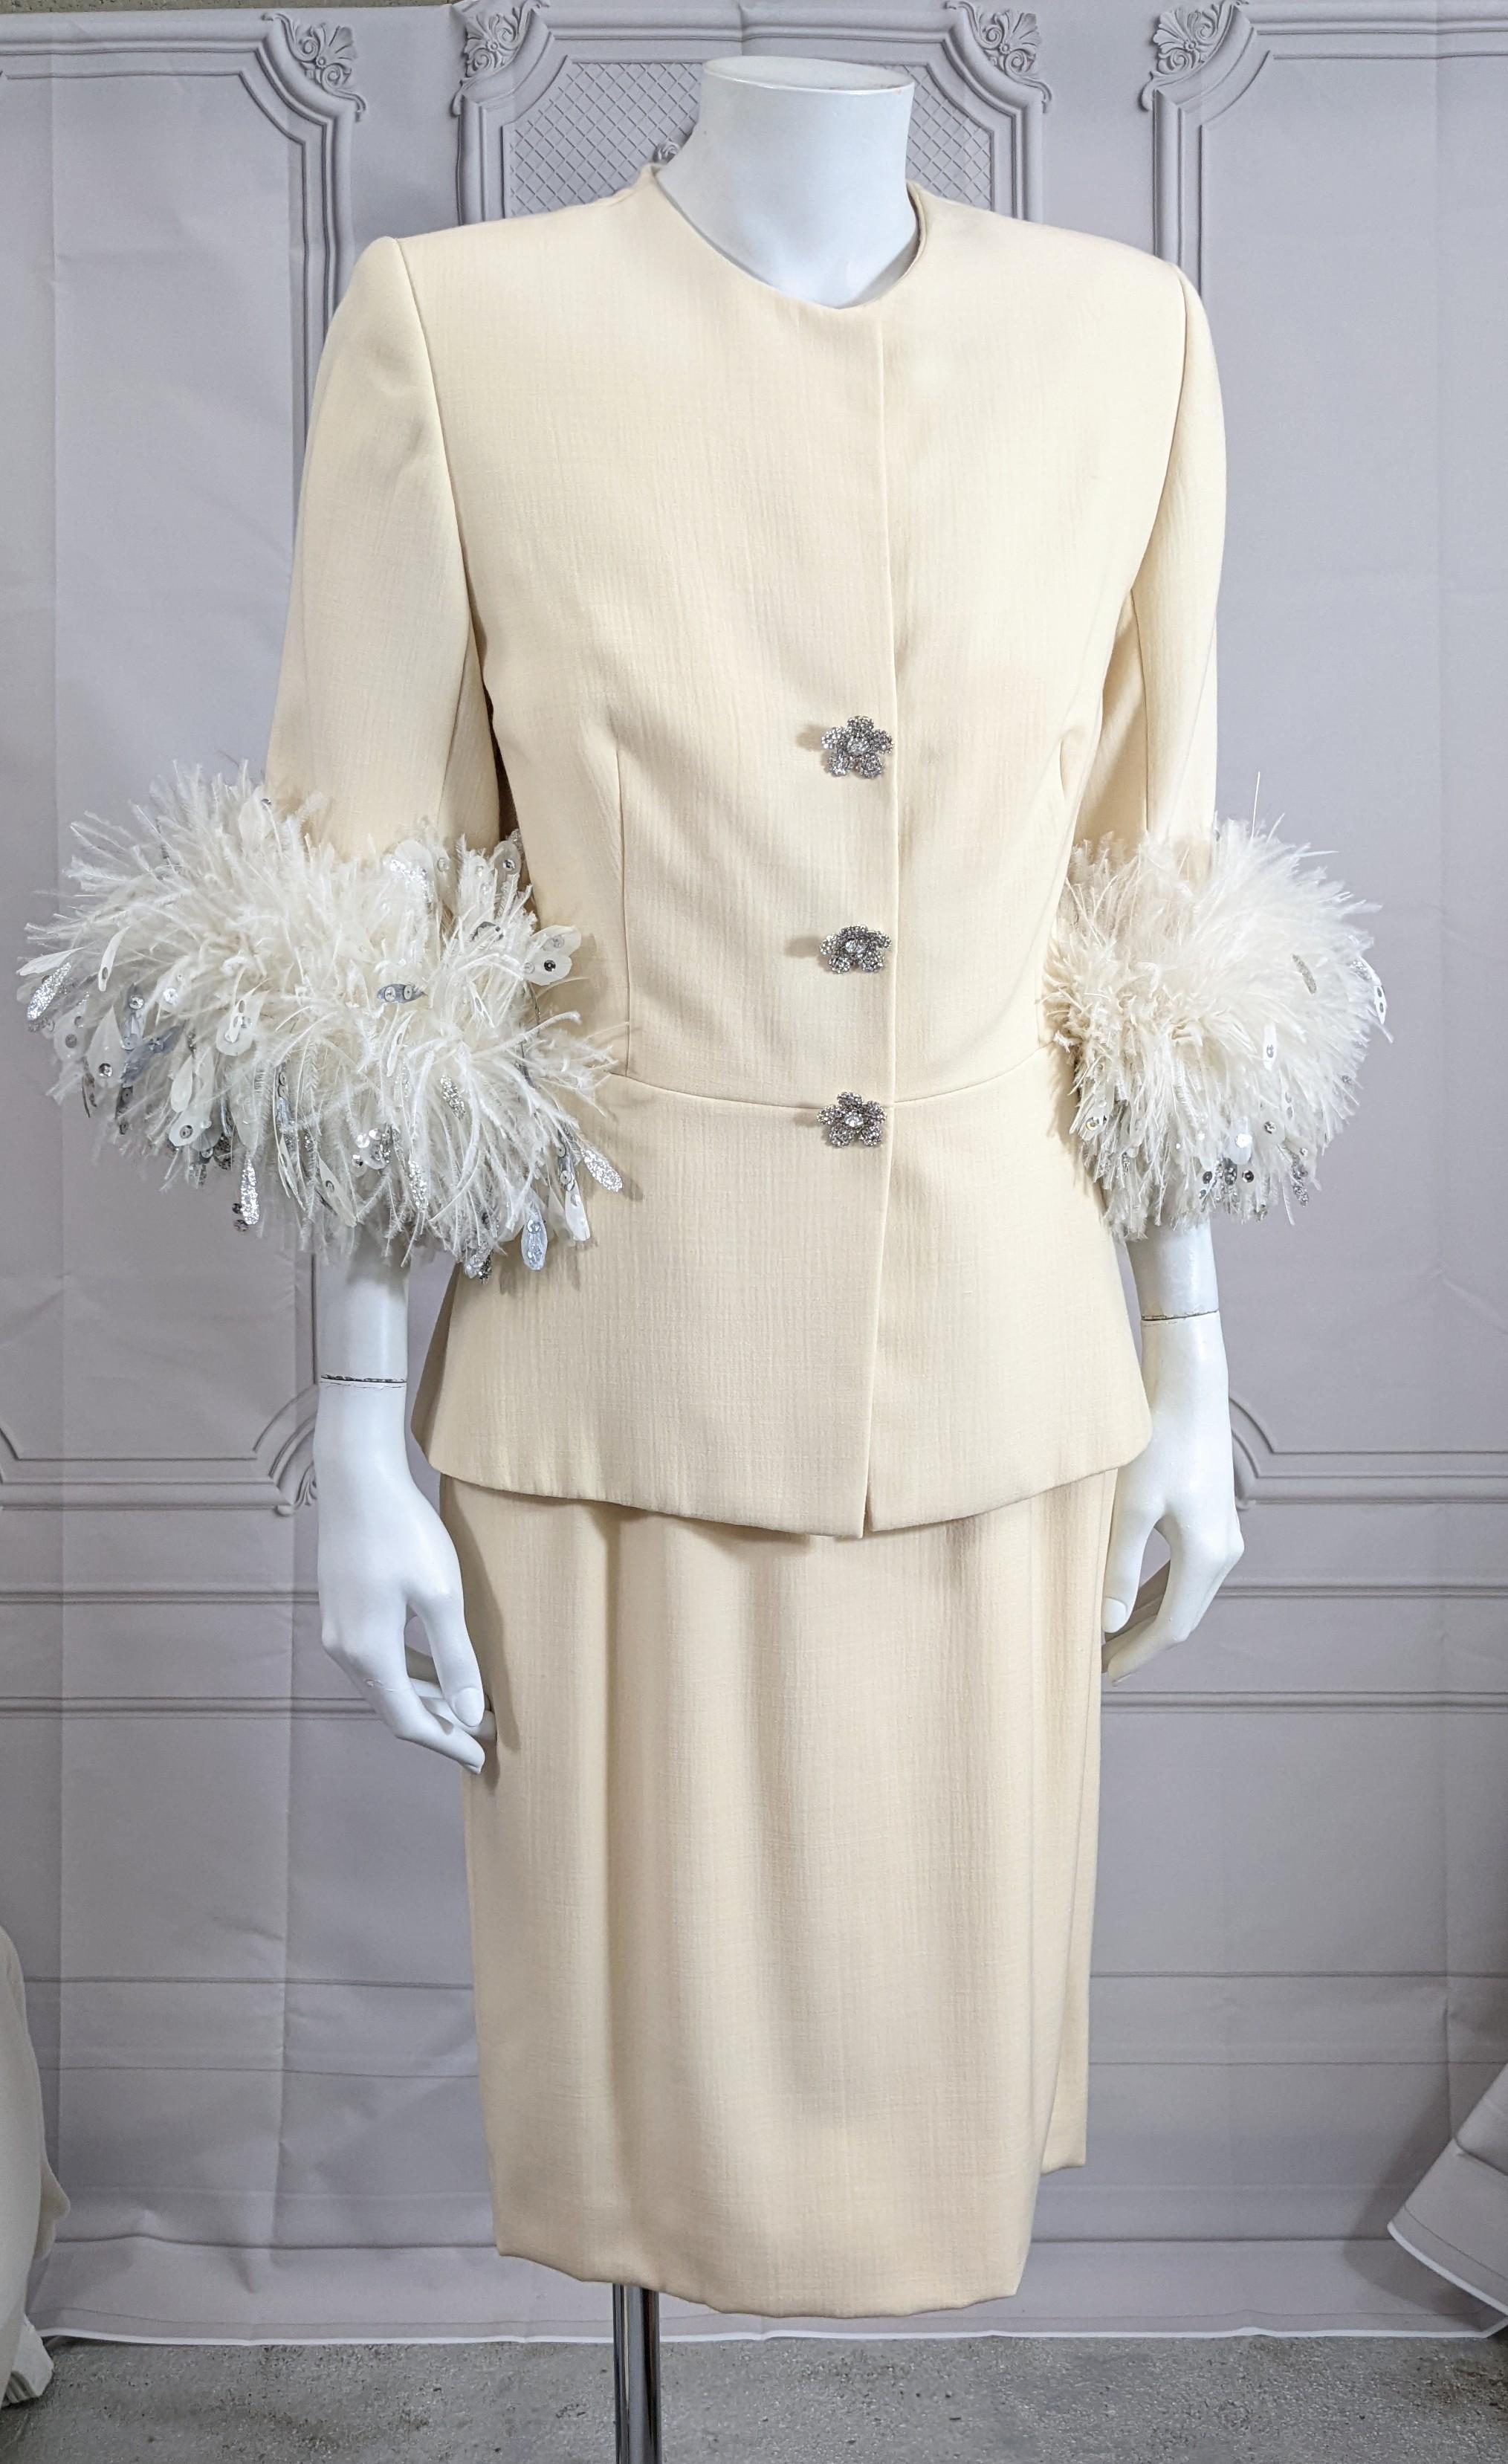 Christian Dior Haute Couture Wool and Feather Trimmed Suit by Gianfranco Ferre. Ivory wool is lined in silk, with 2 extravagant cuffs of varied white feathers, hand painted in silver with hand applied silver sequins for sparkle. Handmade diamonte